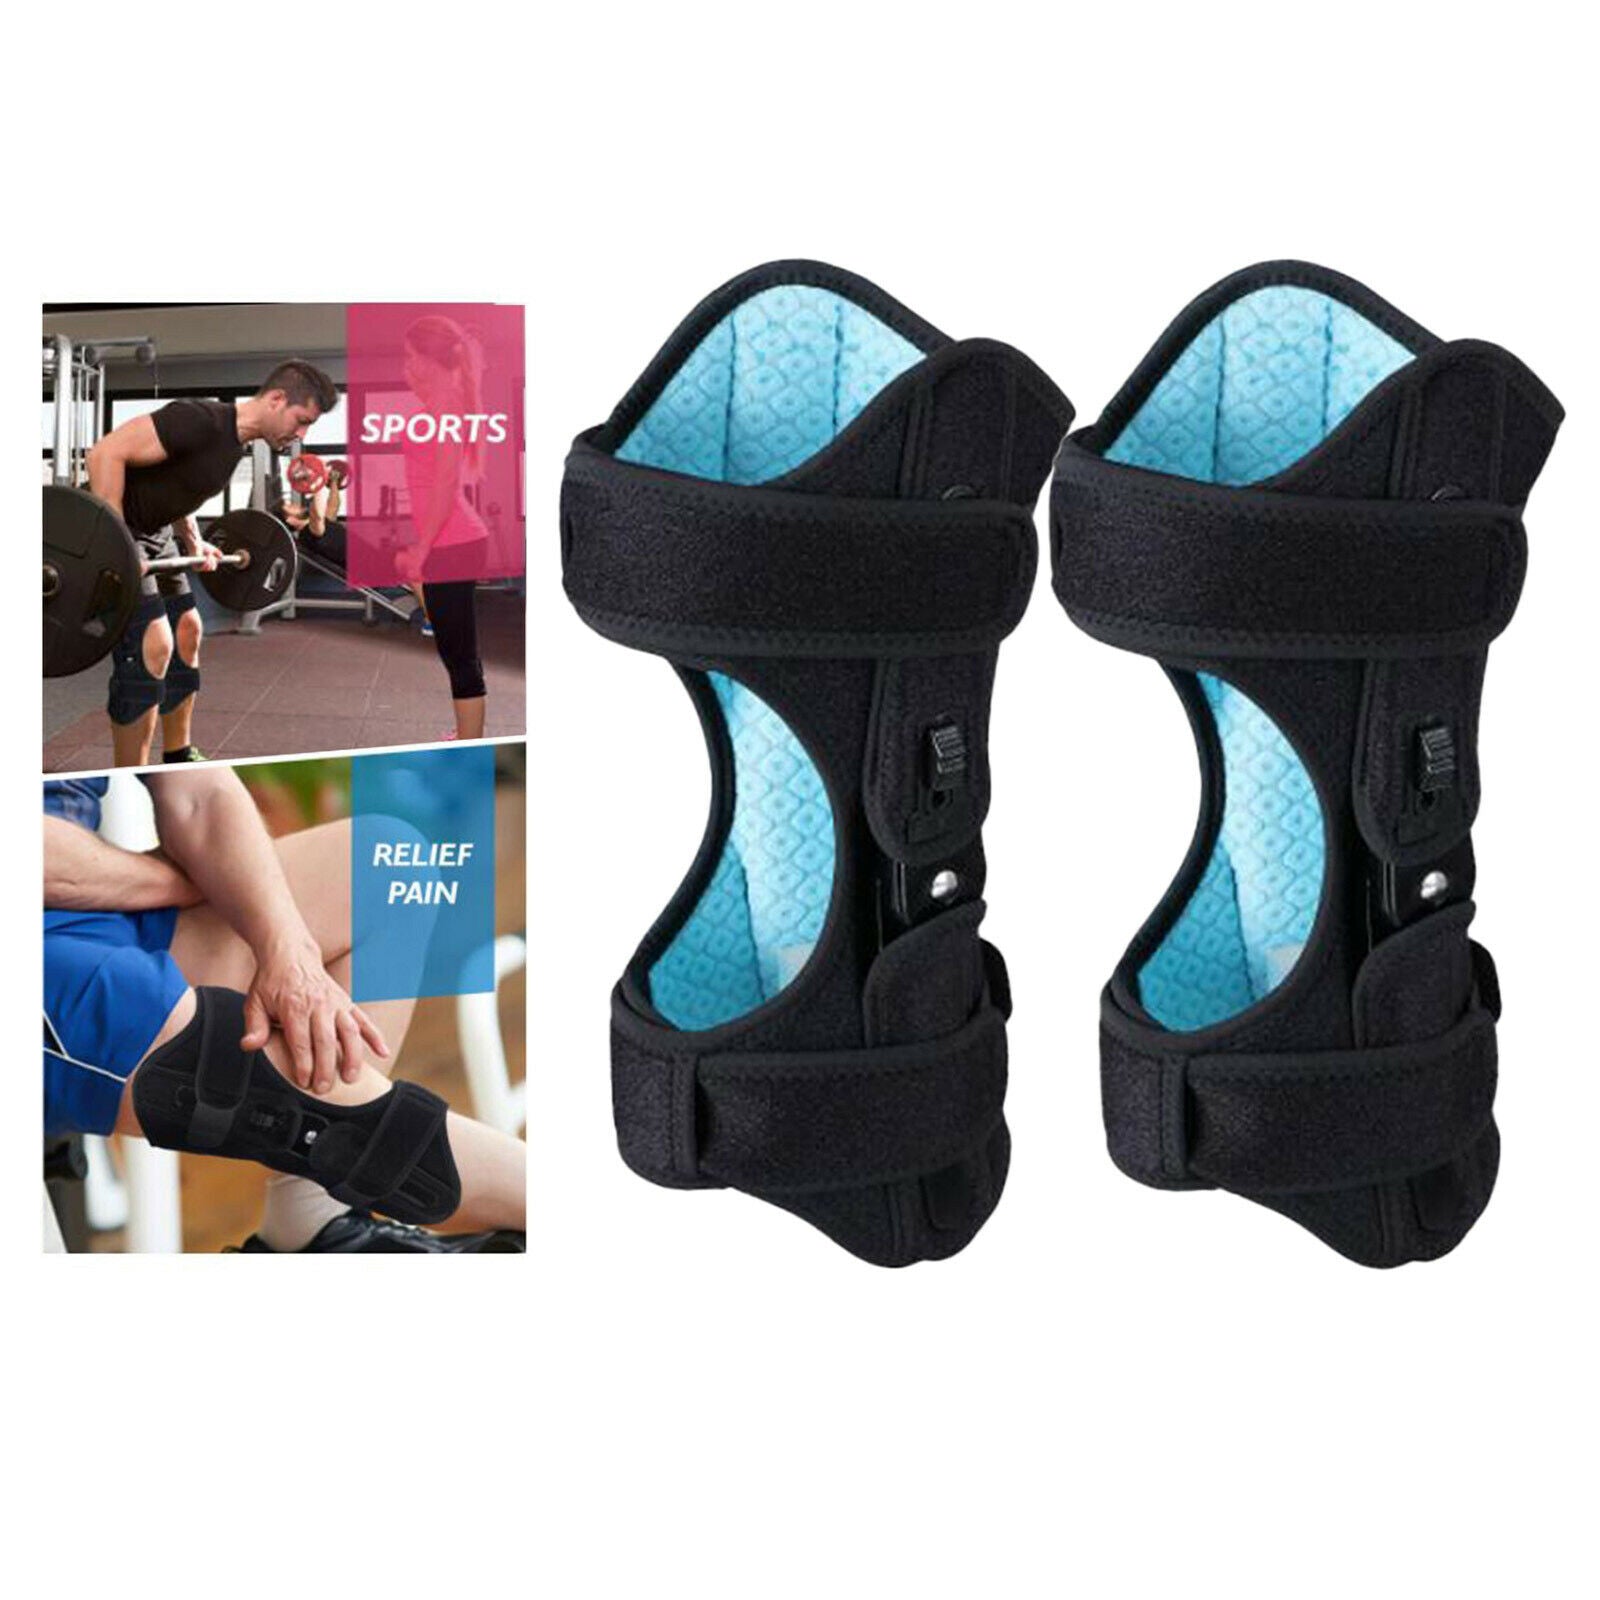 2x knee protection booster Non-slip jointed knee pad support for climbing